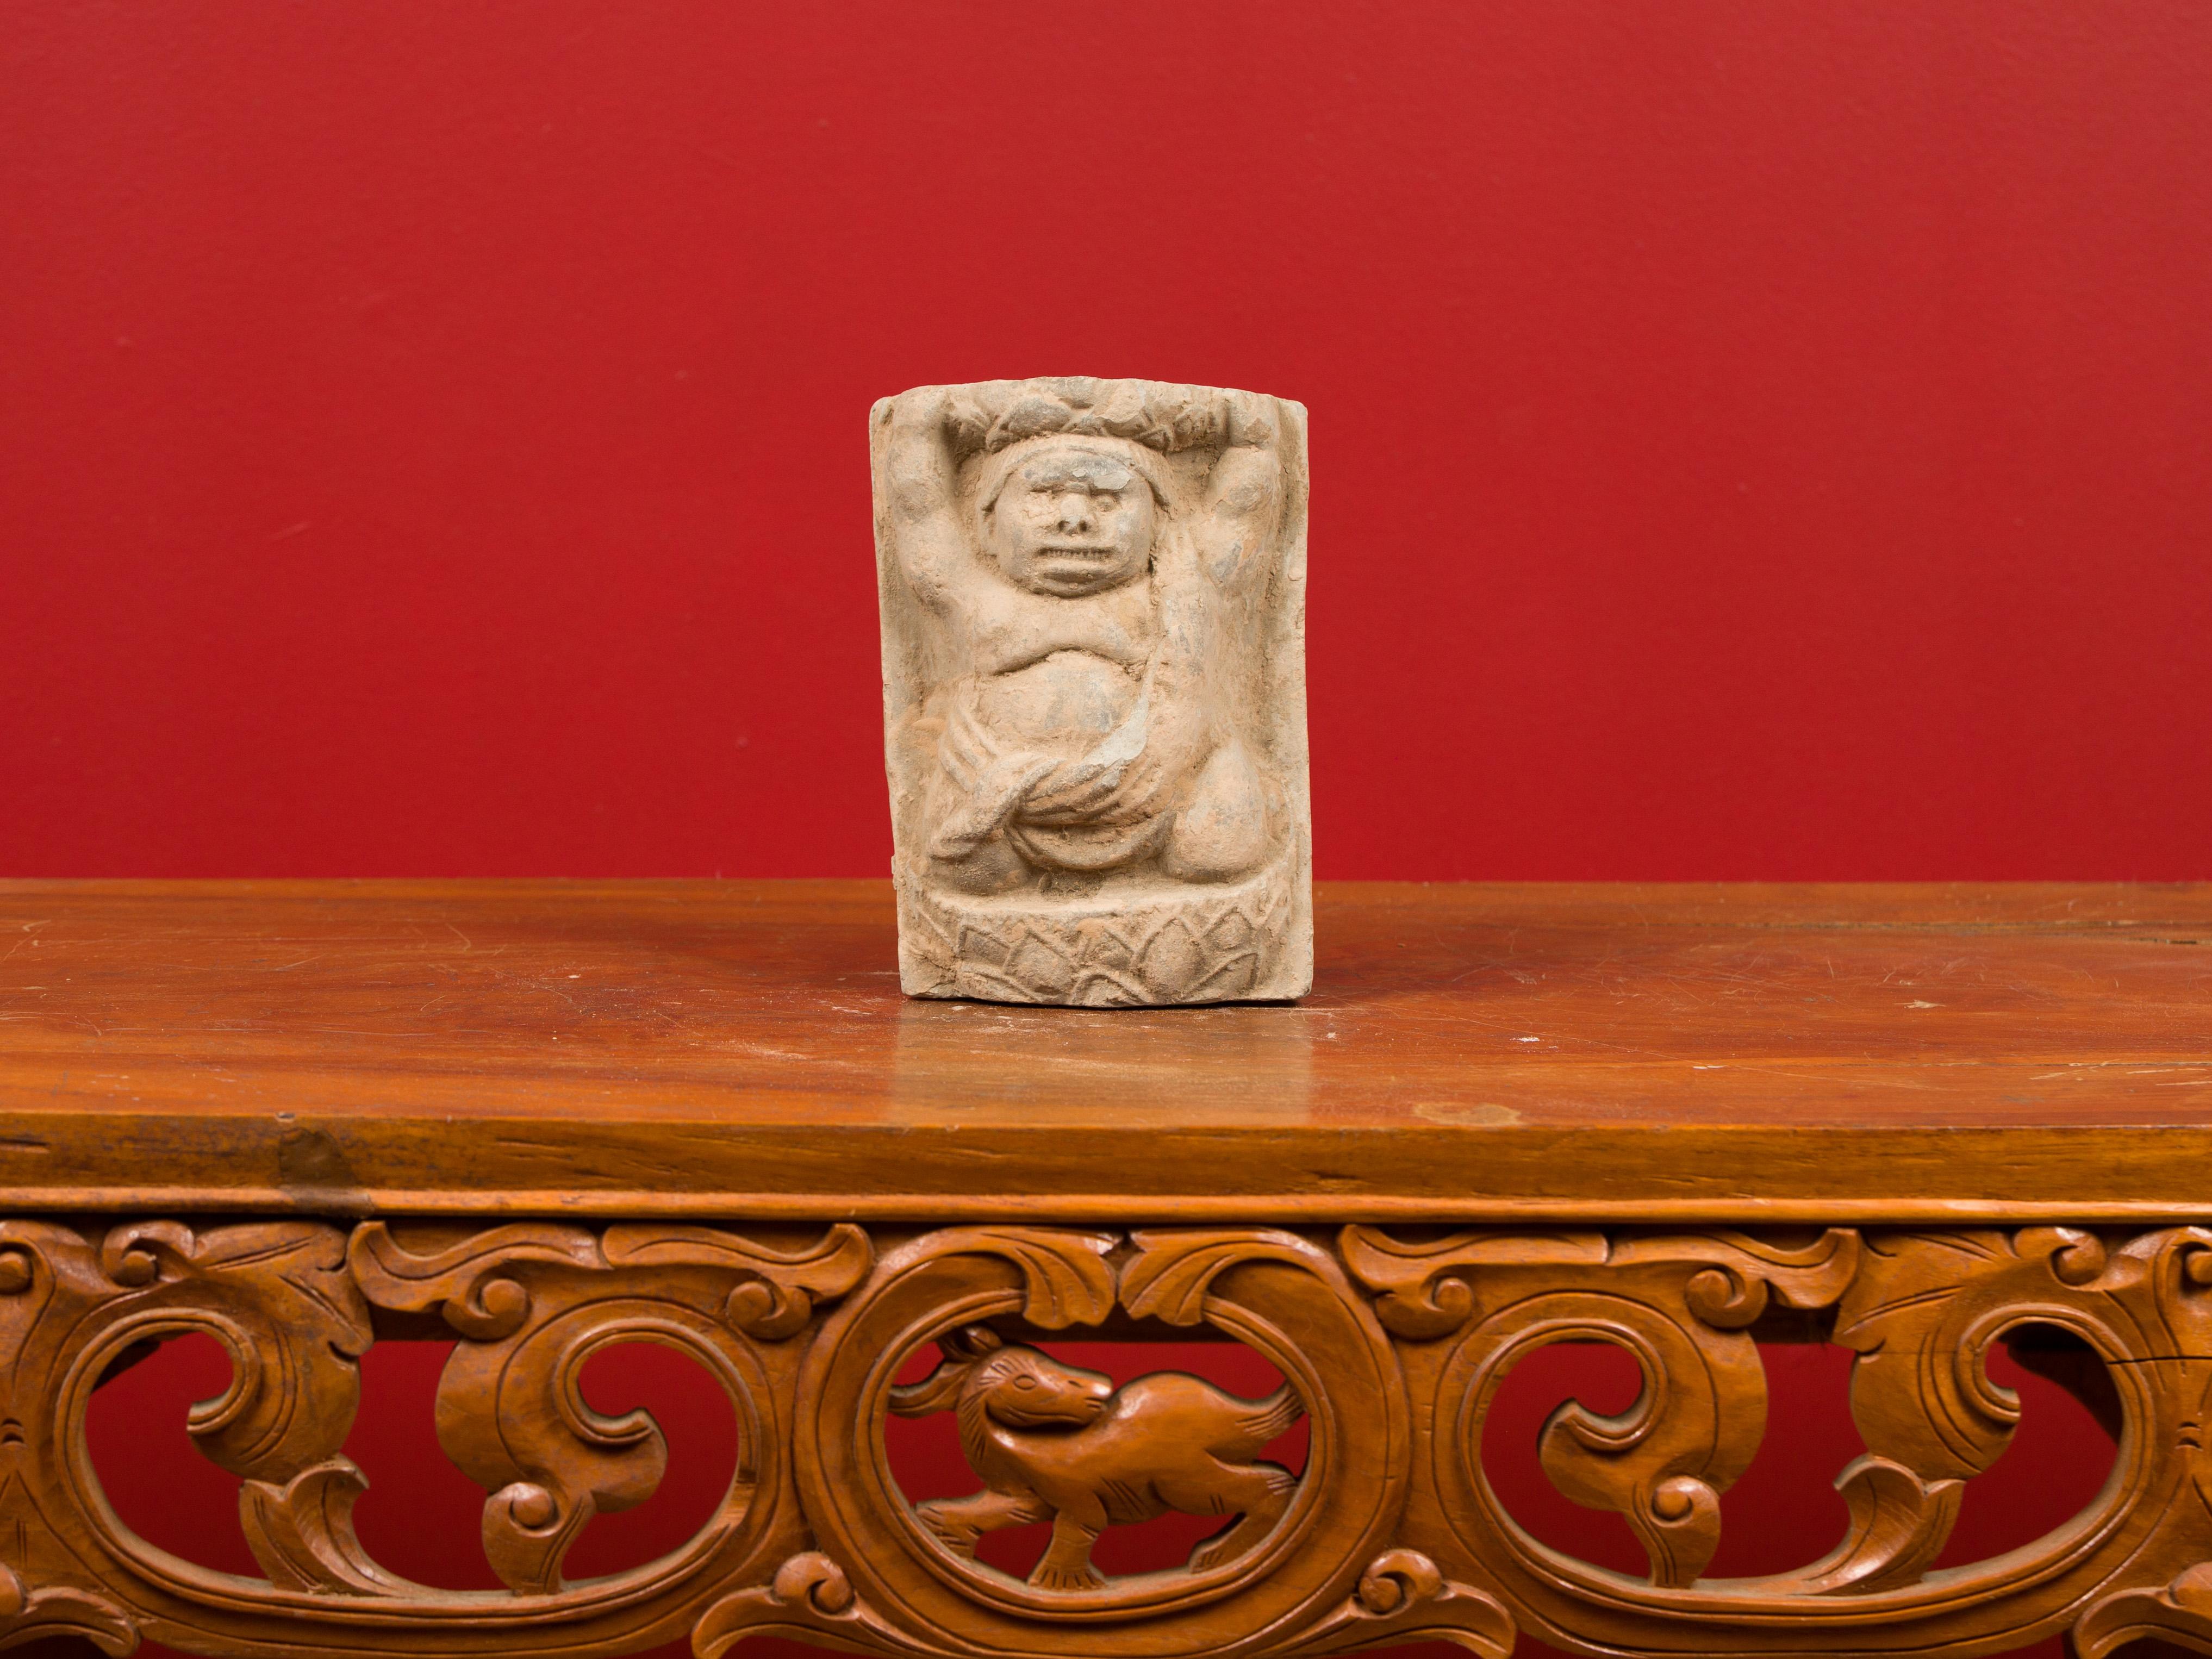 A small Chinese Tang Dynasty carved stone wall plaque circa 618-907 AD with frontal figure. Crafted in China during the Tang Dynasty, this carved stone wall plaque depicts a male figure depicted in a frontal position, his arms raised. Wearing a